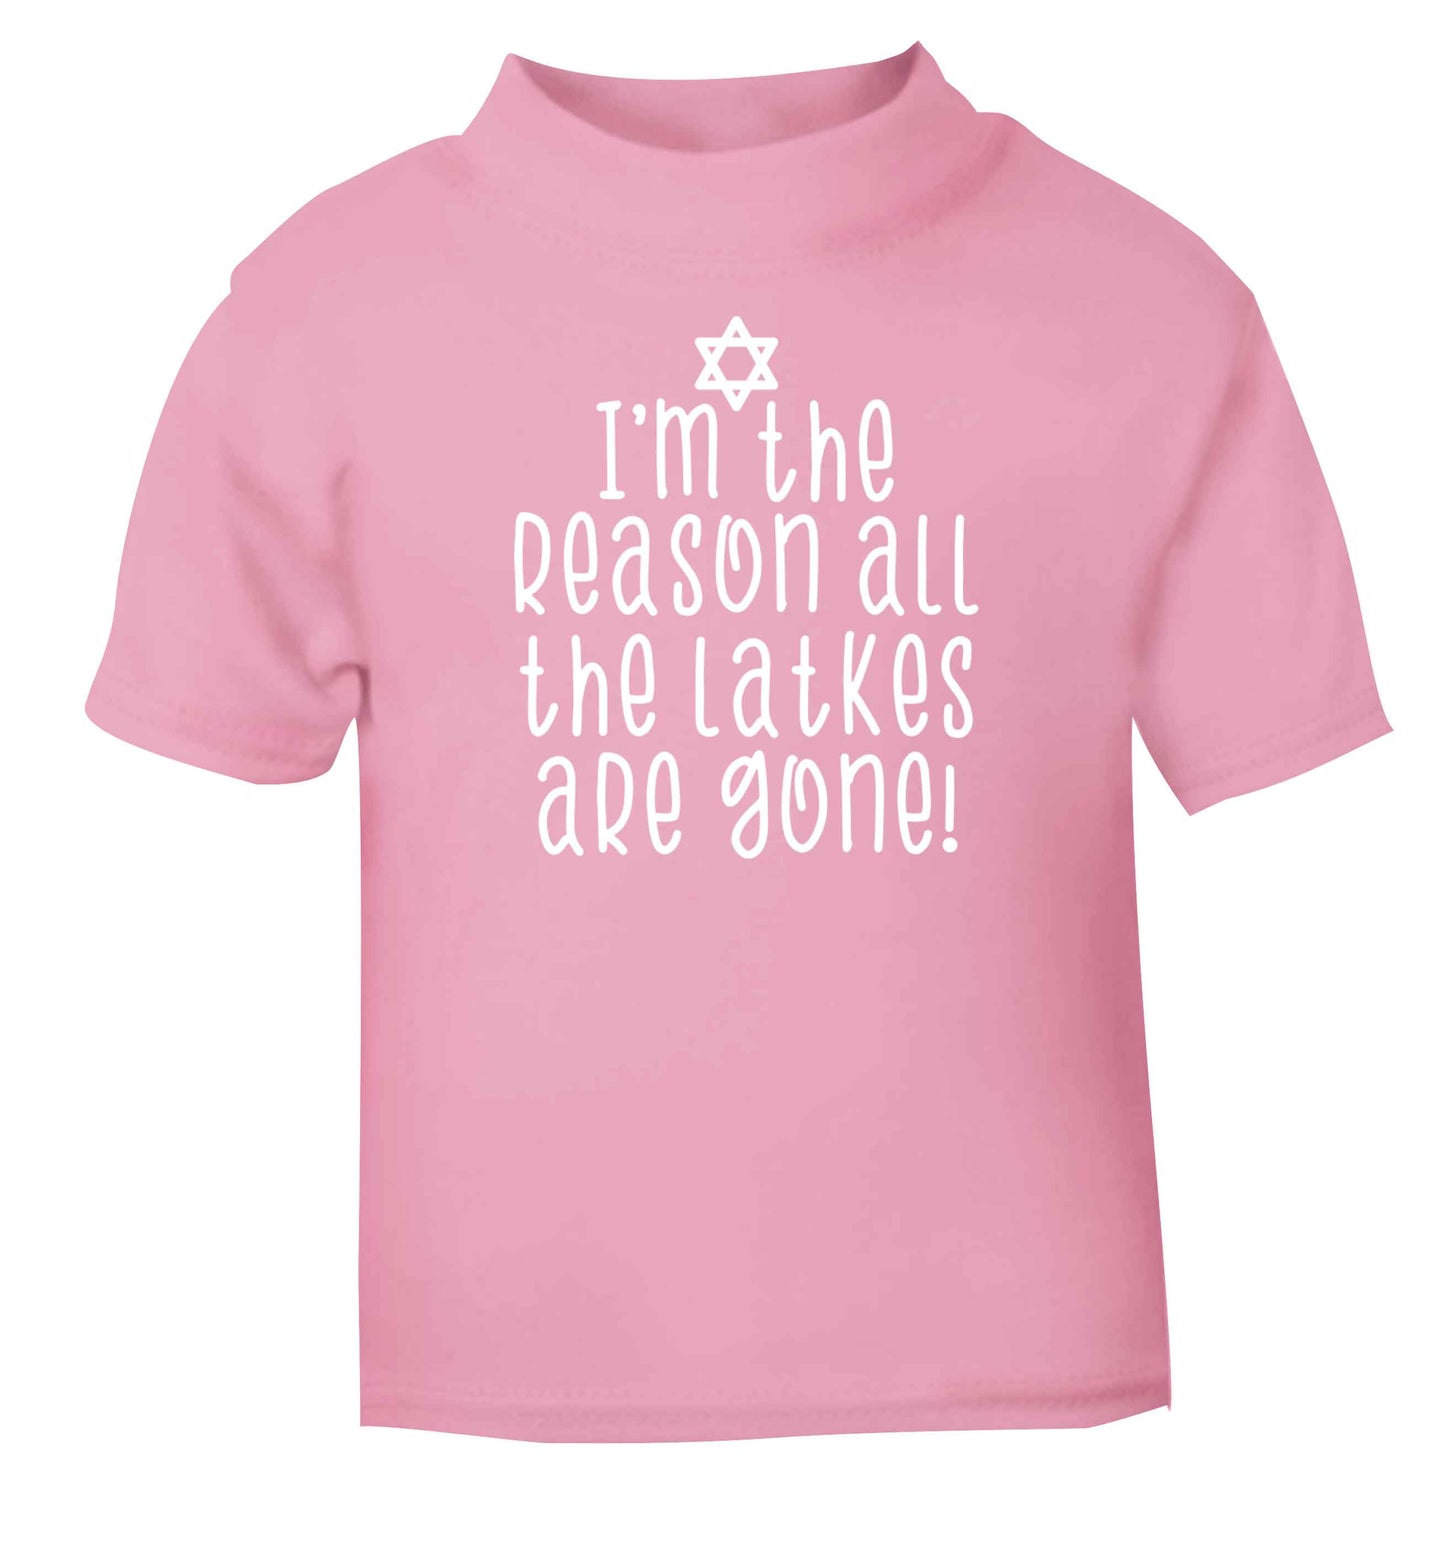 I'm the reason all the latkes are gone light pink baby toddler Tshirt 2 Years